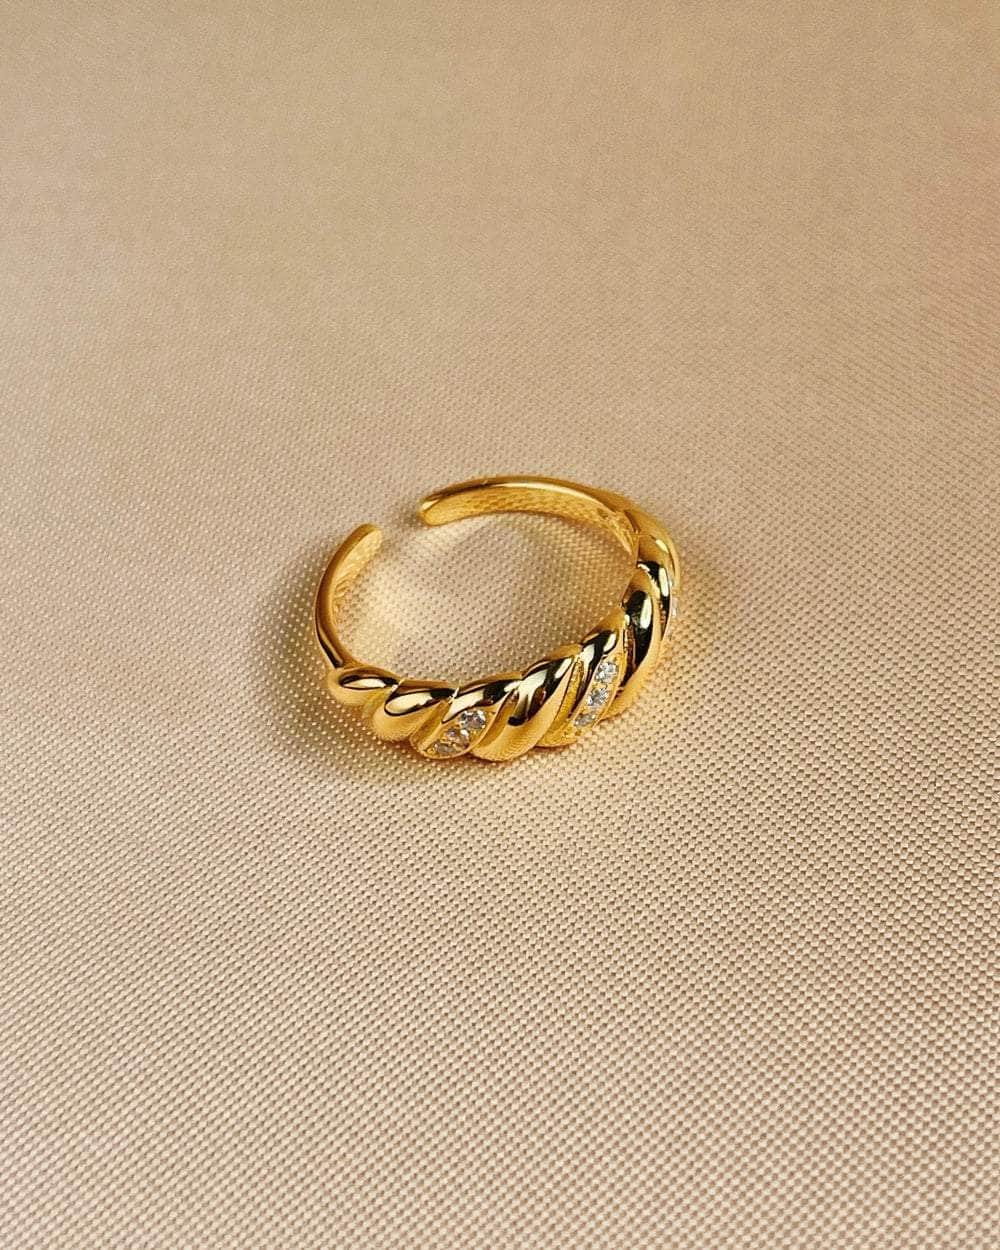 So Dainty Co. Rings Hazel Gold Ring Gold Plated 925 Sterling Silver Jewelry